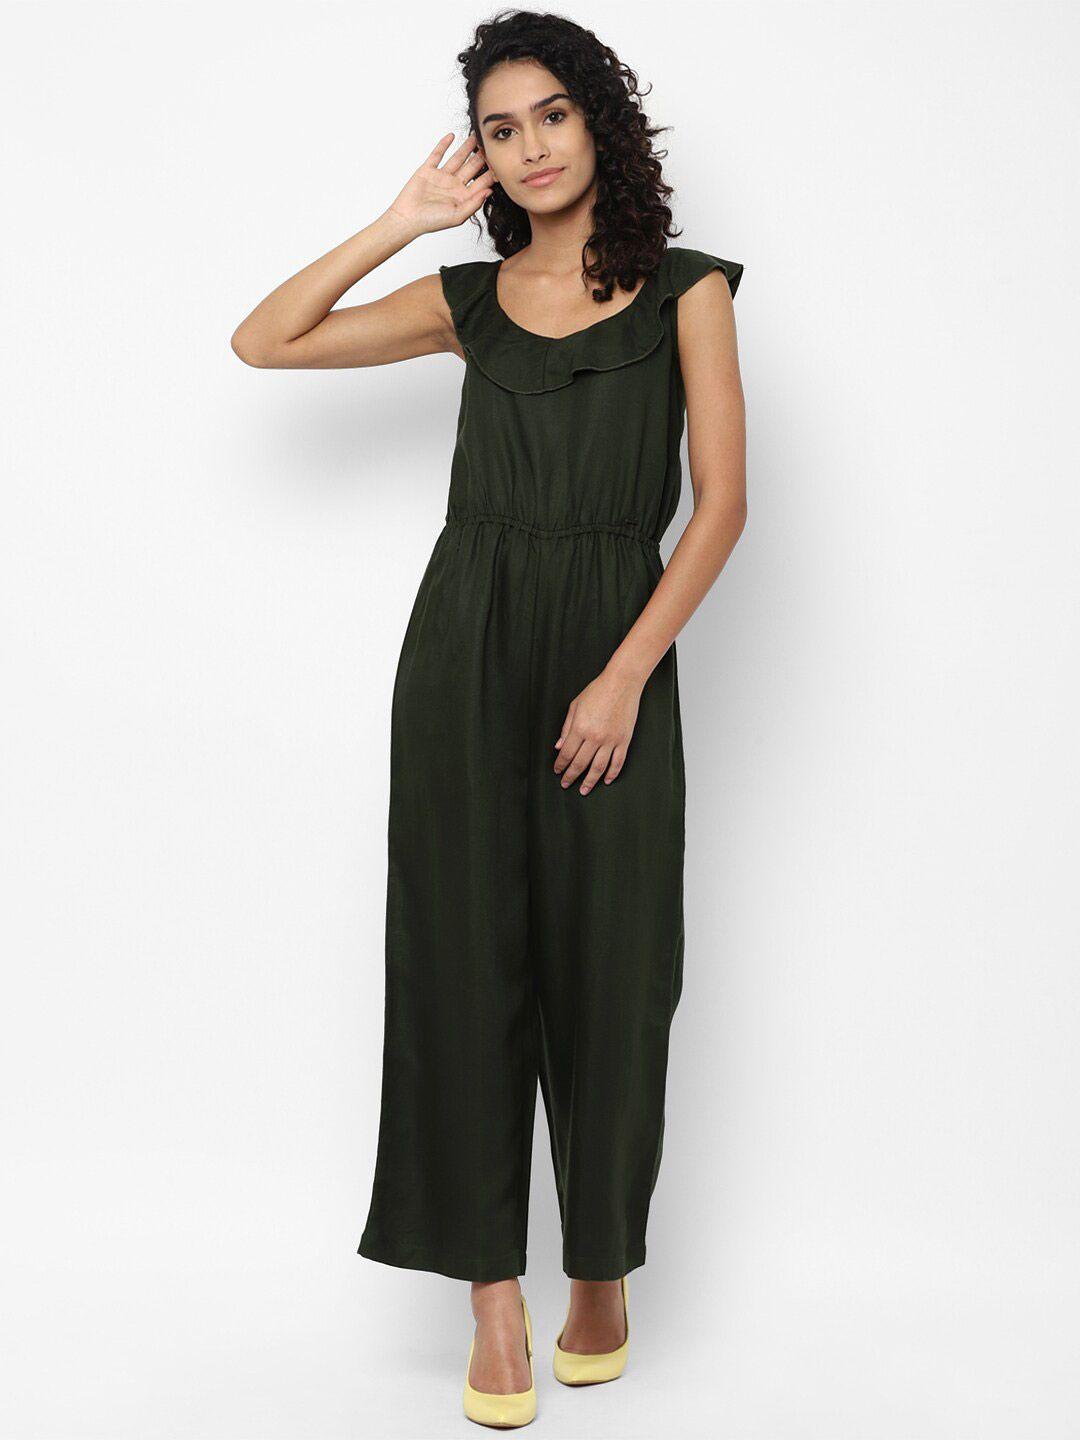 allen solly woman olive green basic jumpsuit with ruffles